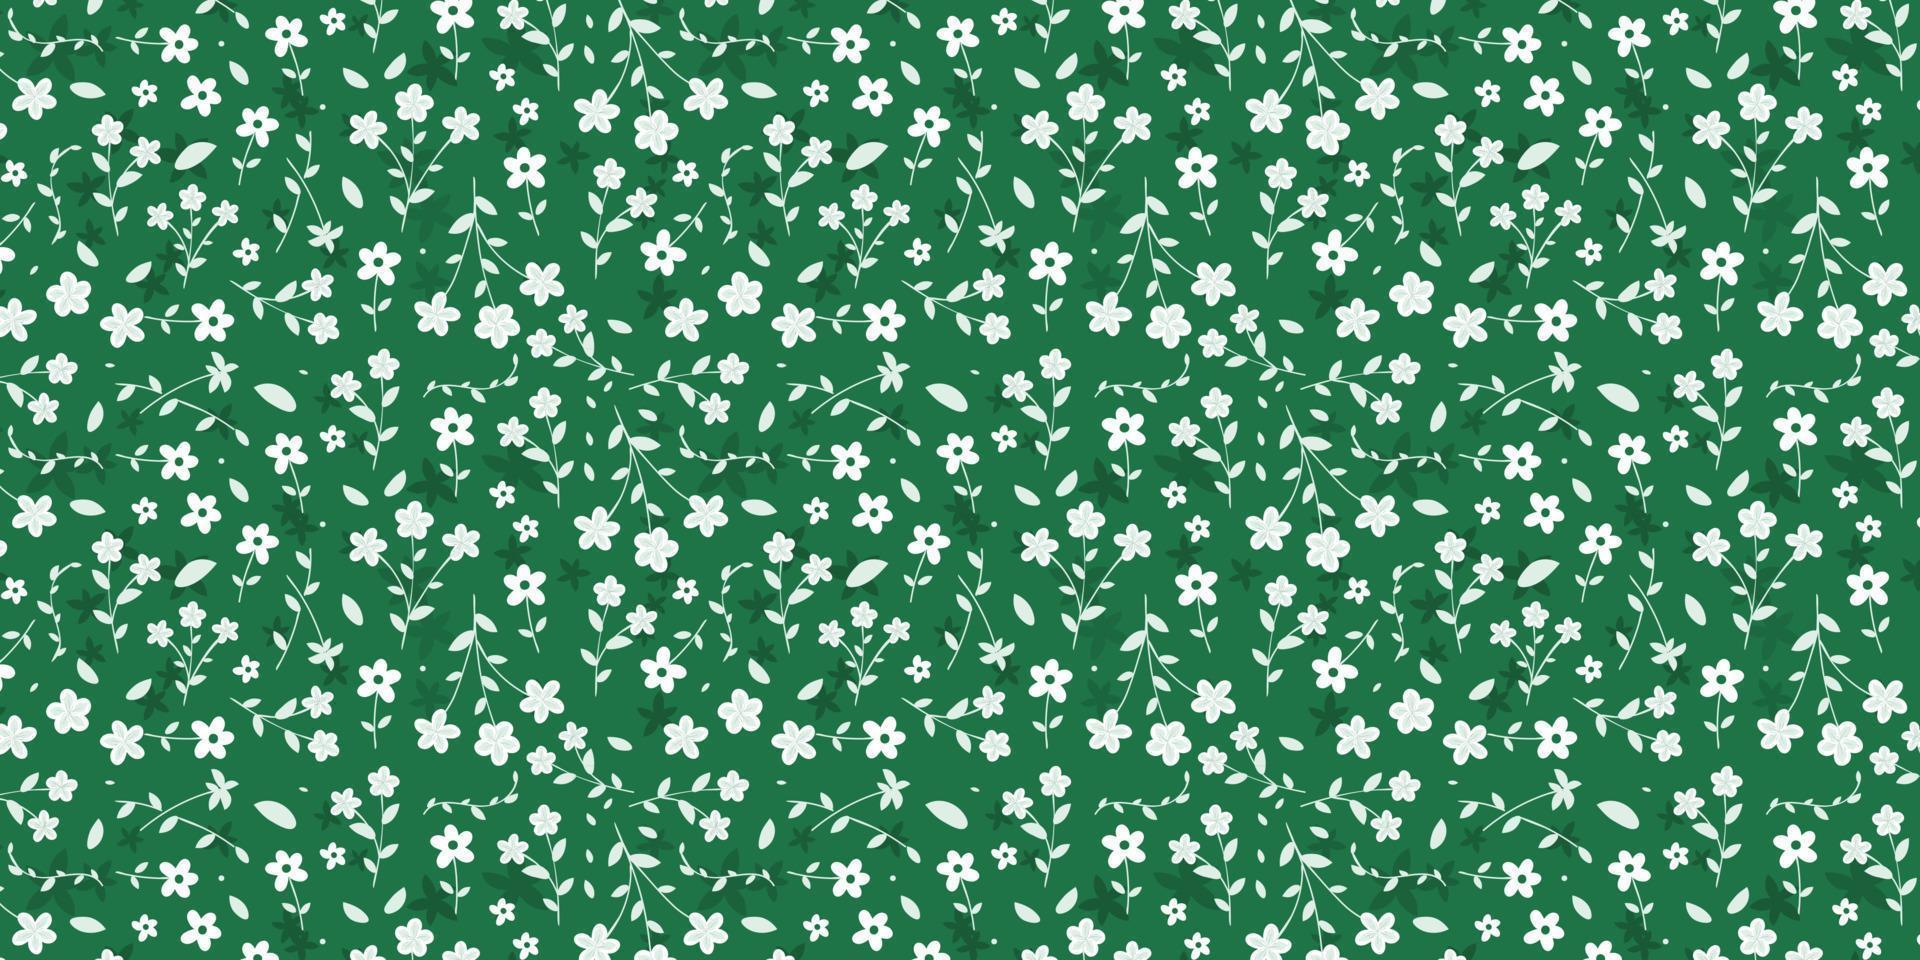 Premium floral pattern illustration. Abstract flower and leaf crowded style. Elegance look on green background. Find fill pattern on swatches vector